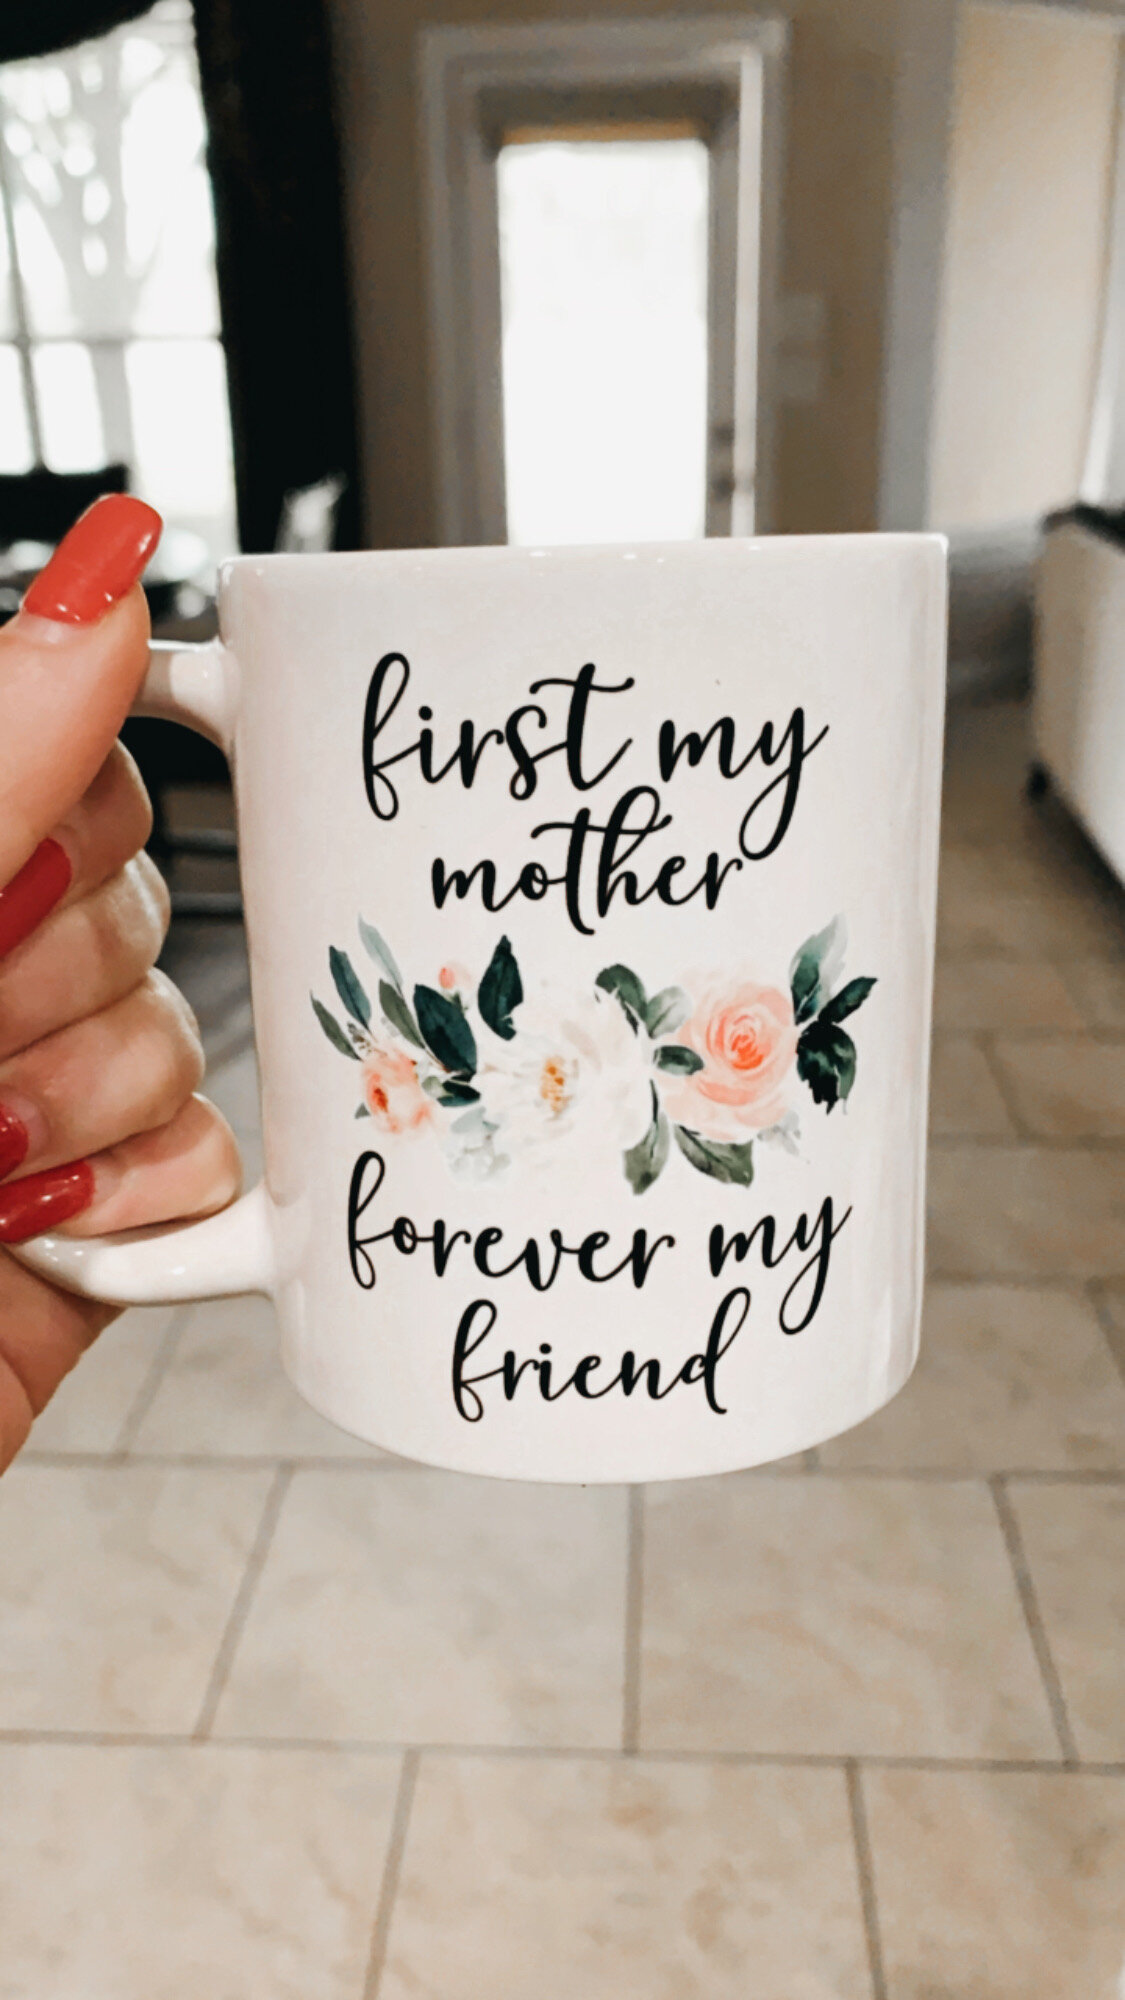 Mother's Day Gift Guide 2021 — Avery Carrier